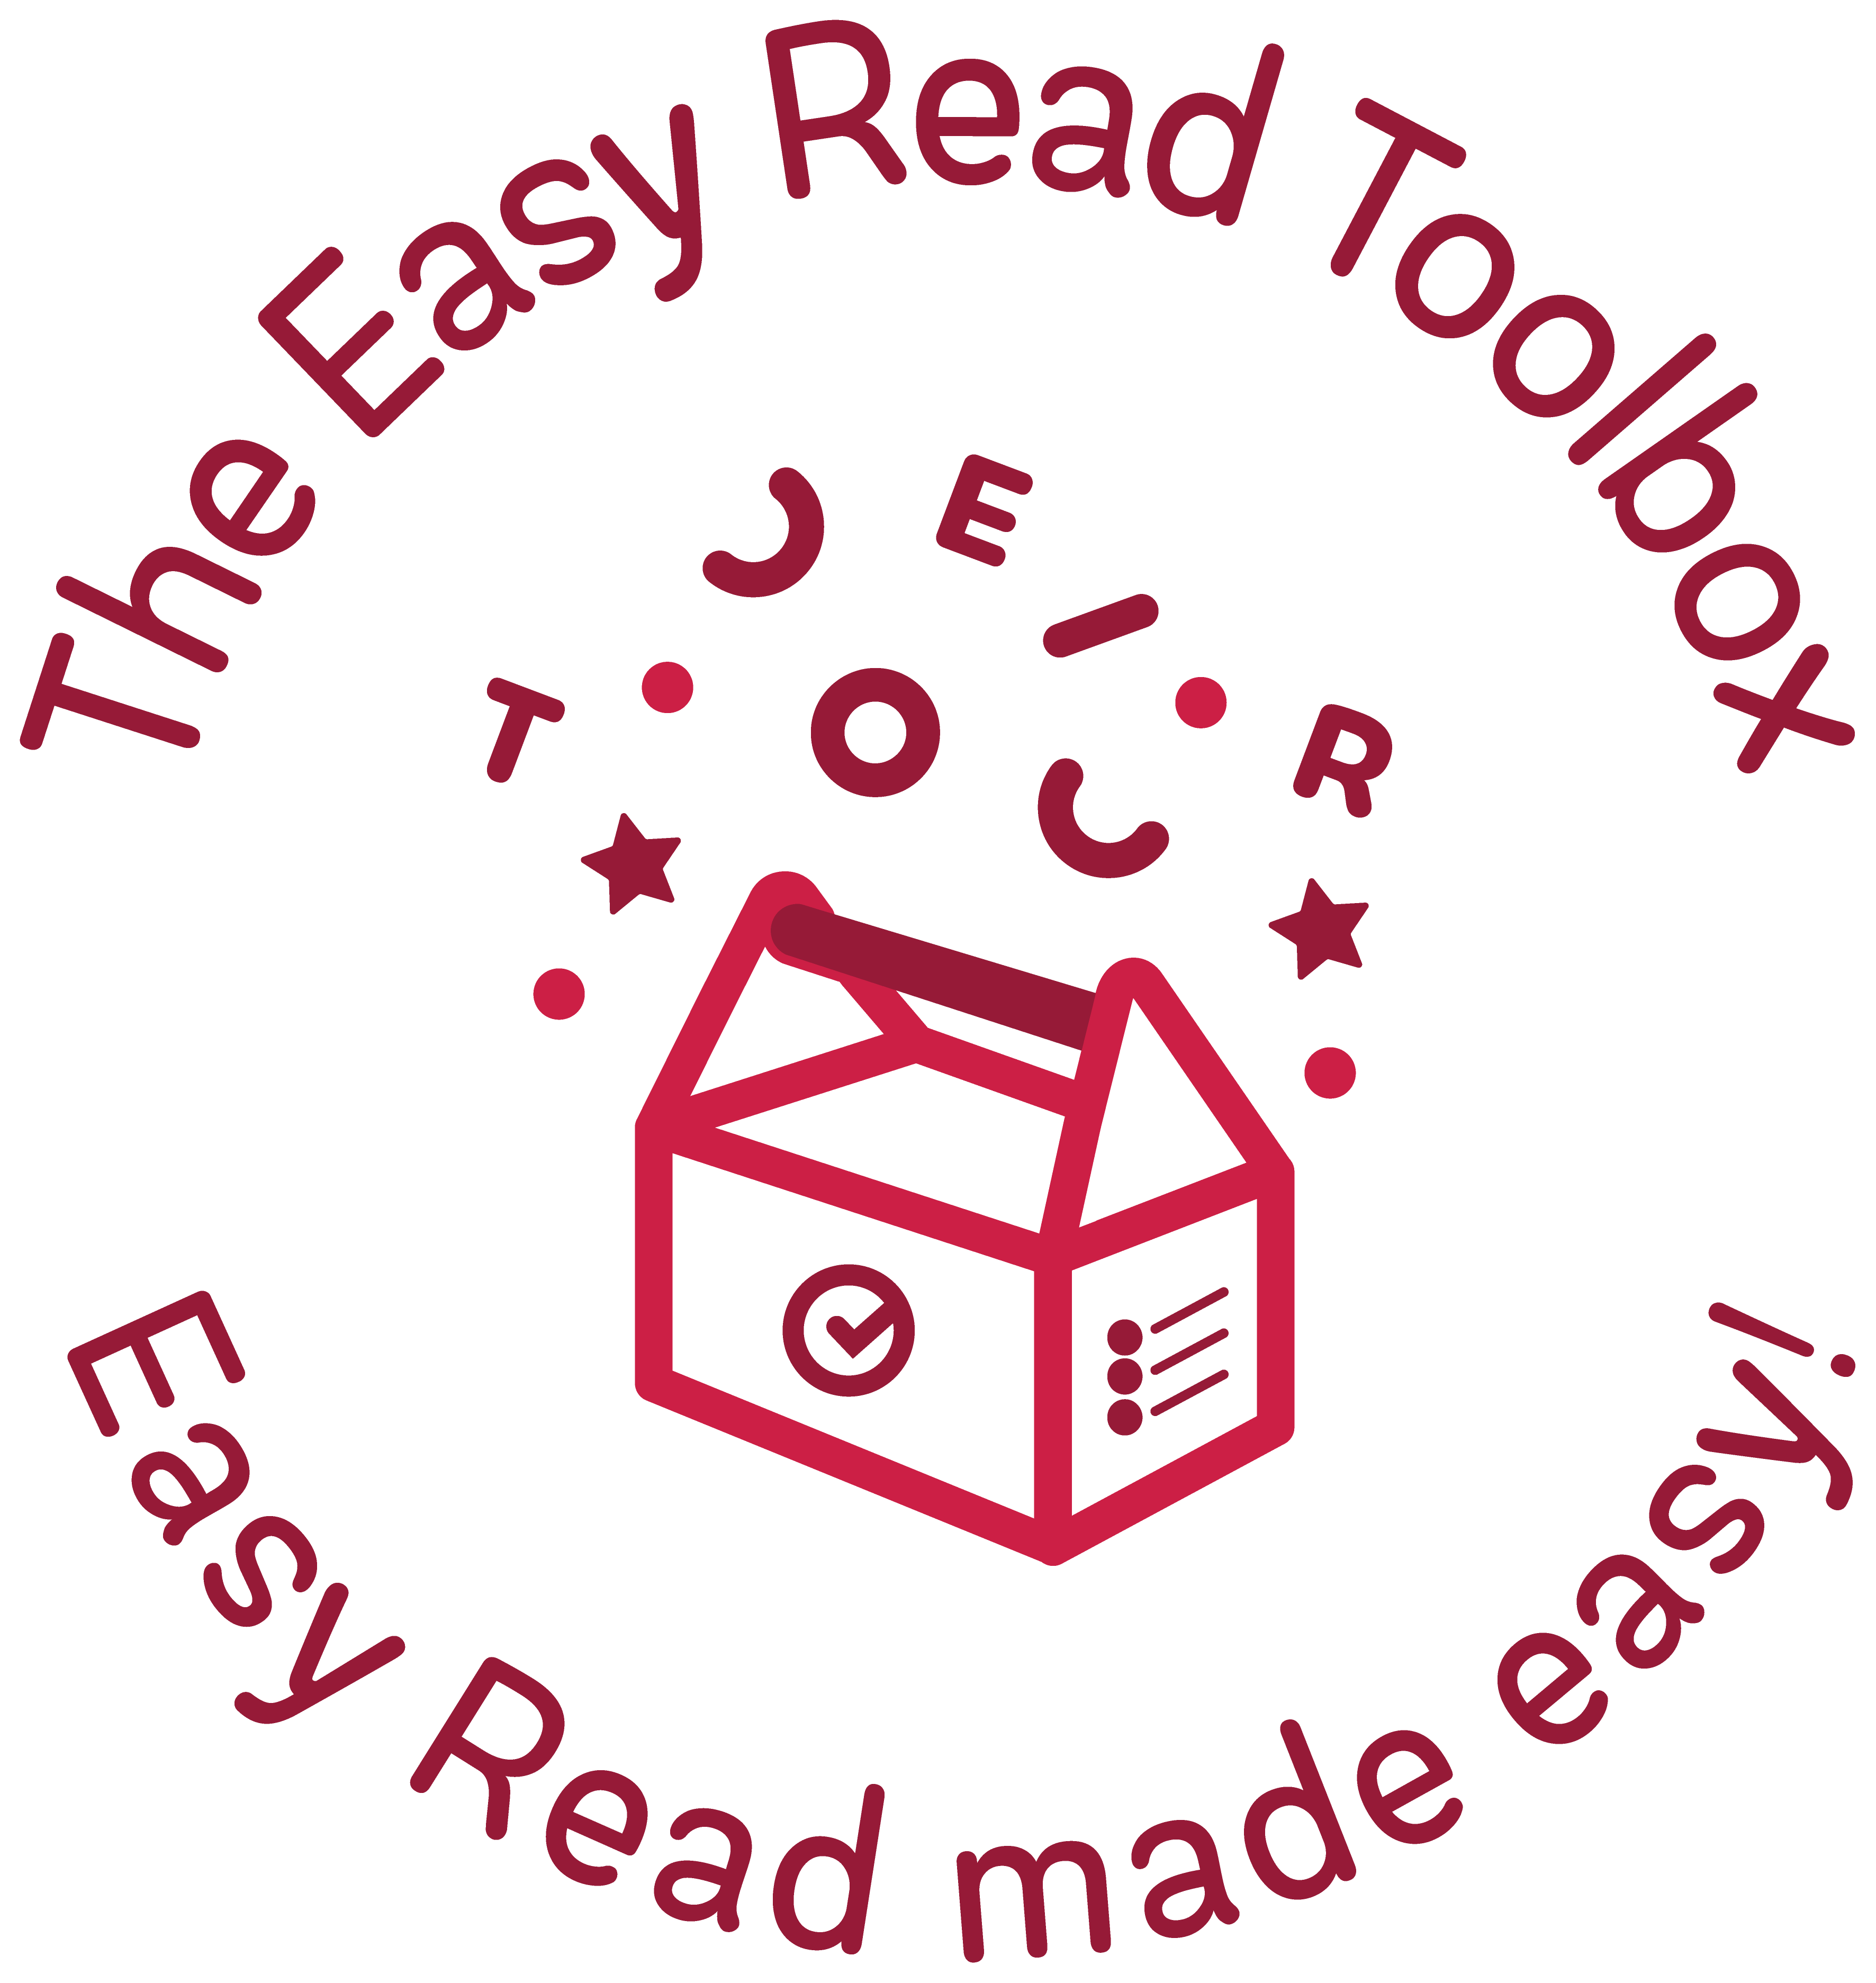 The Easy Read Toolbox